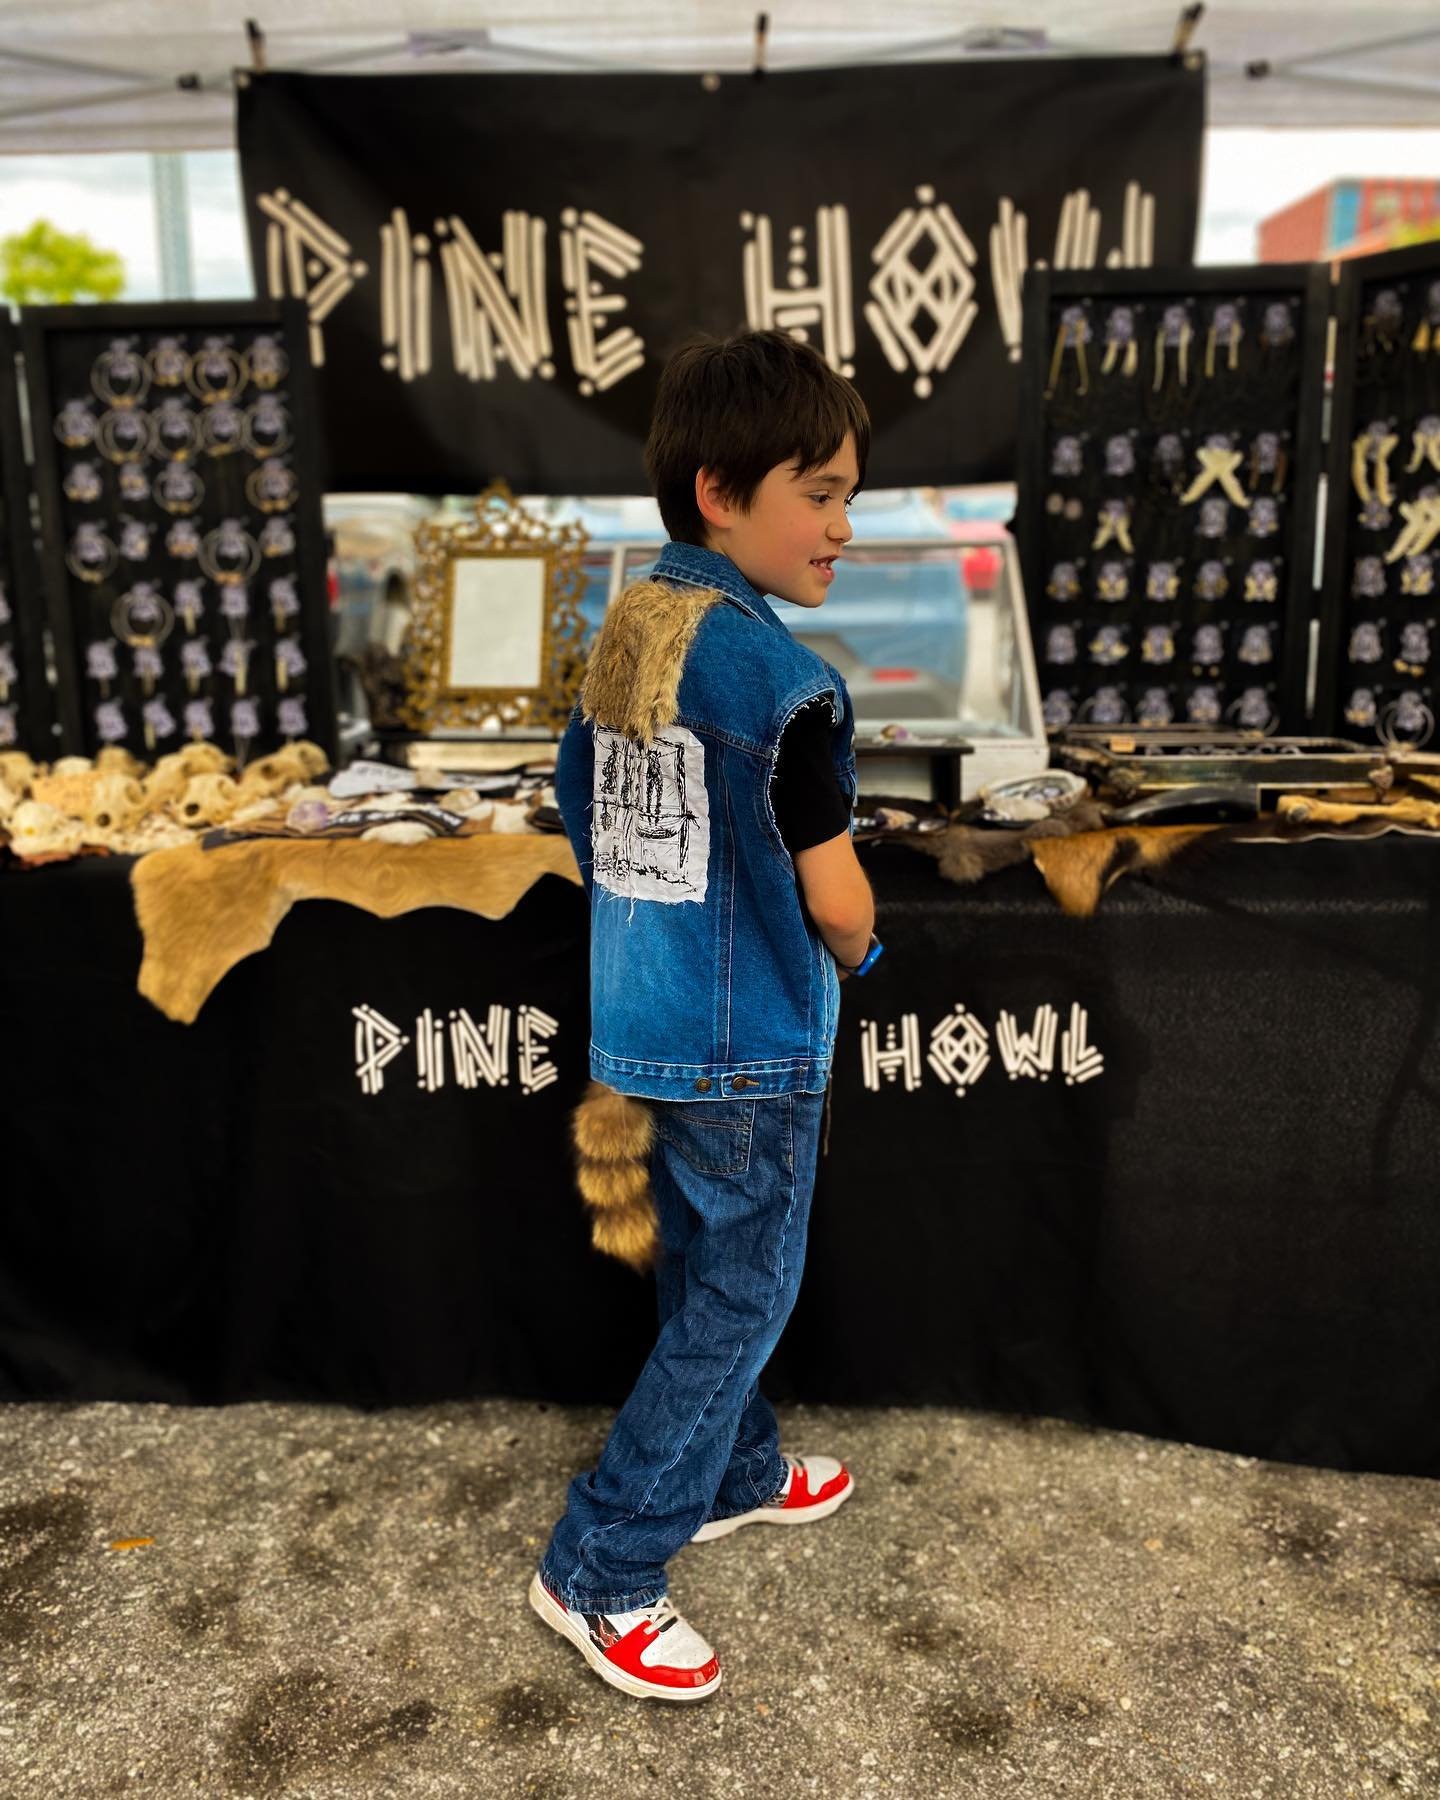 Thank you to all the sweet folks who came out to @yallmartsc today! This lil dude rocking a vest my partner made was too cute. I&rsquo;ll be back in Columbia for the @se_punk_flea_market in May! Follow @papa_wolfs for more vests. 🖤
.
.
.
.
.
.
.
#ya